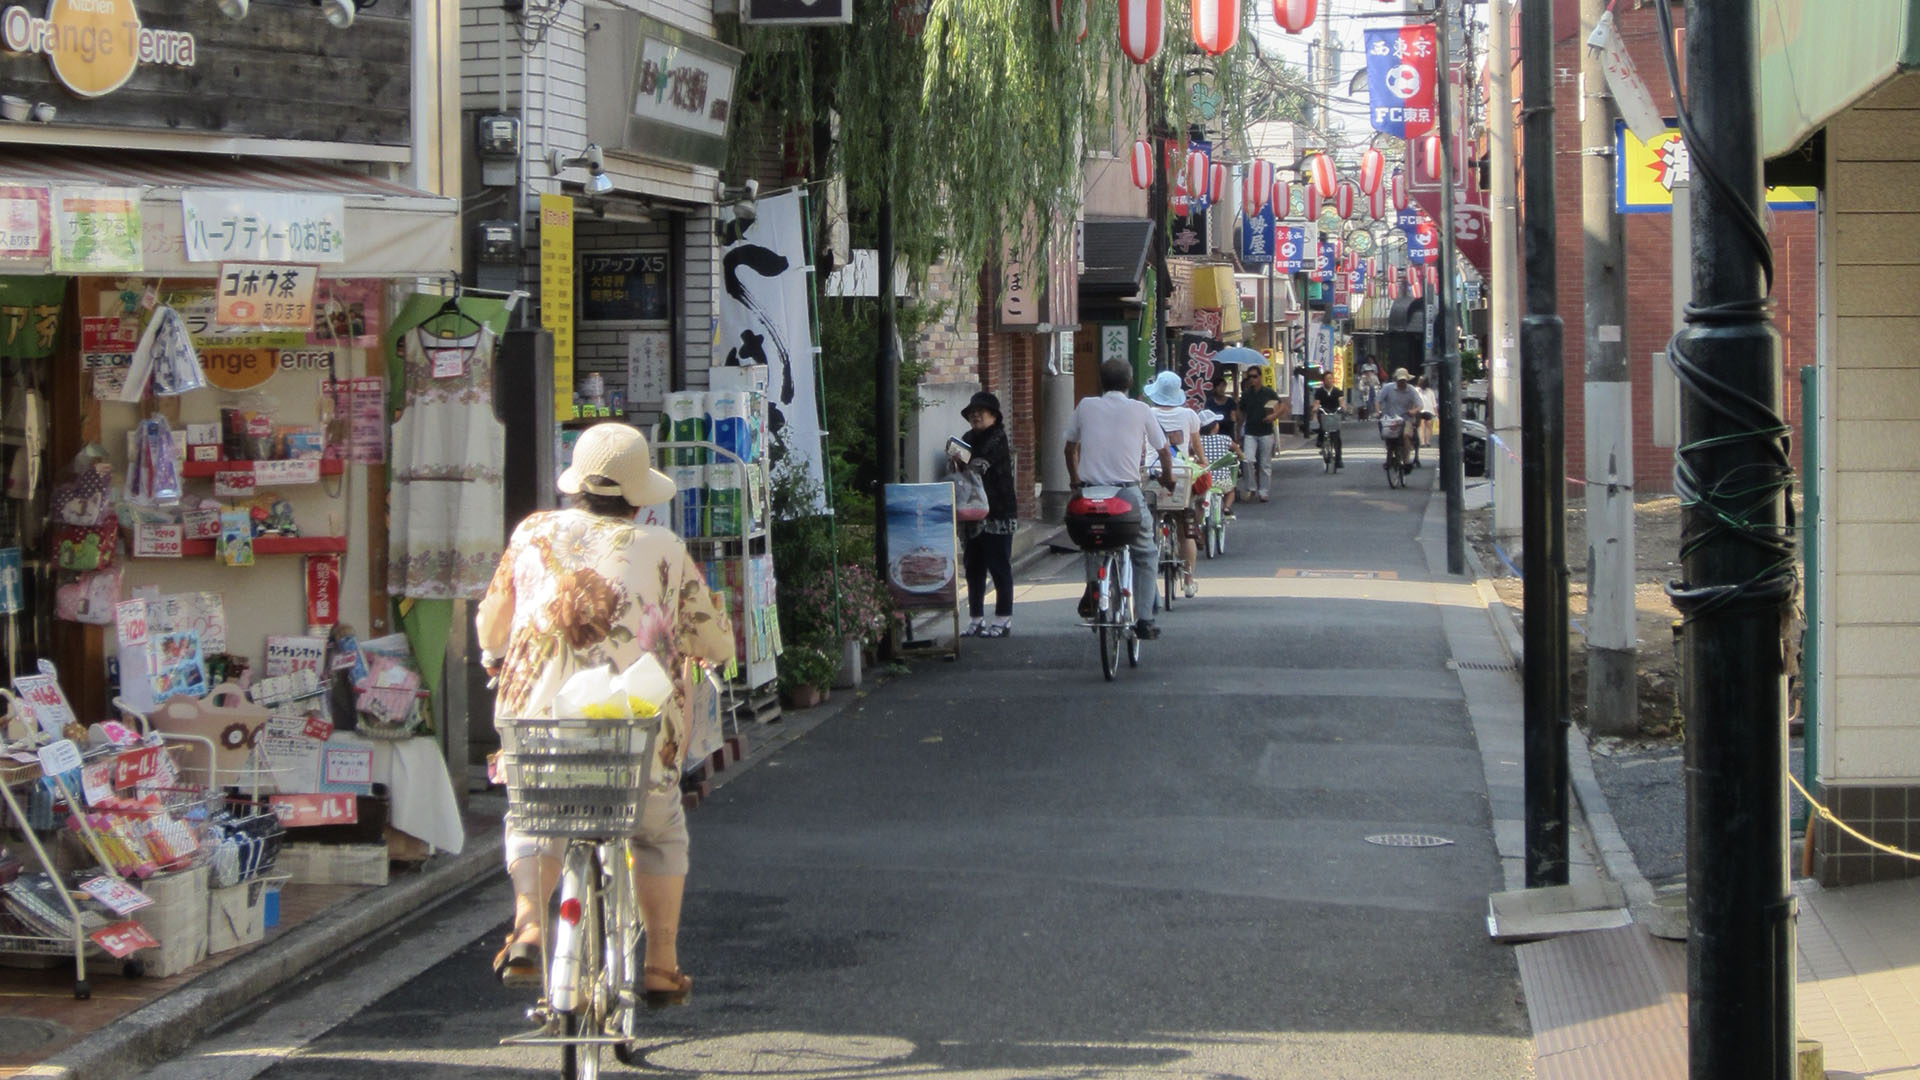 People riding bikes down a street in an Asian city